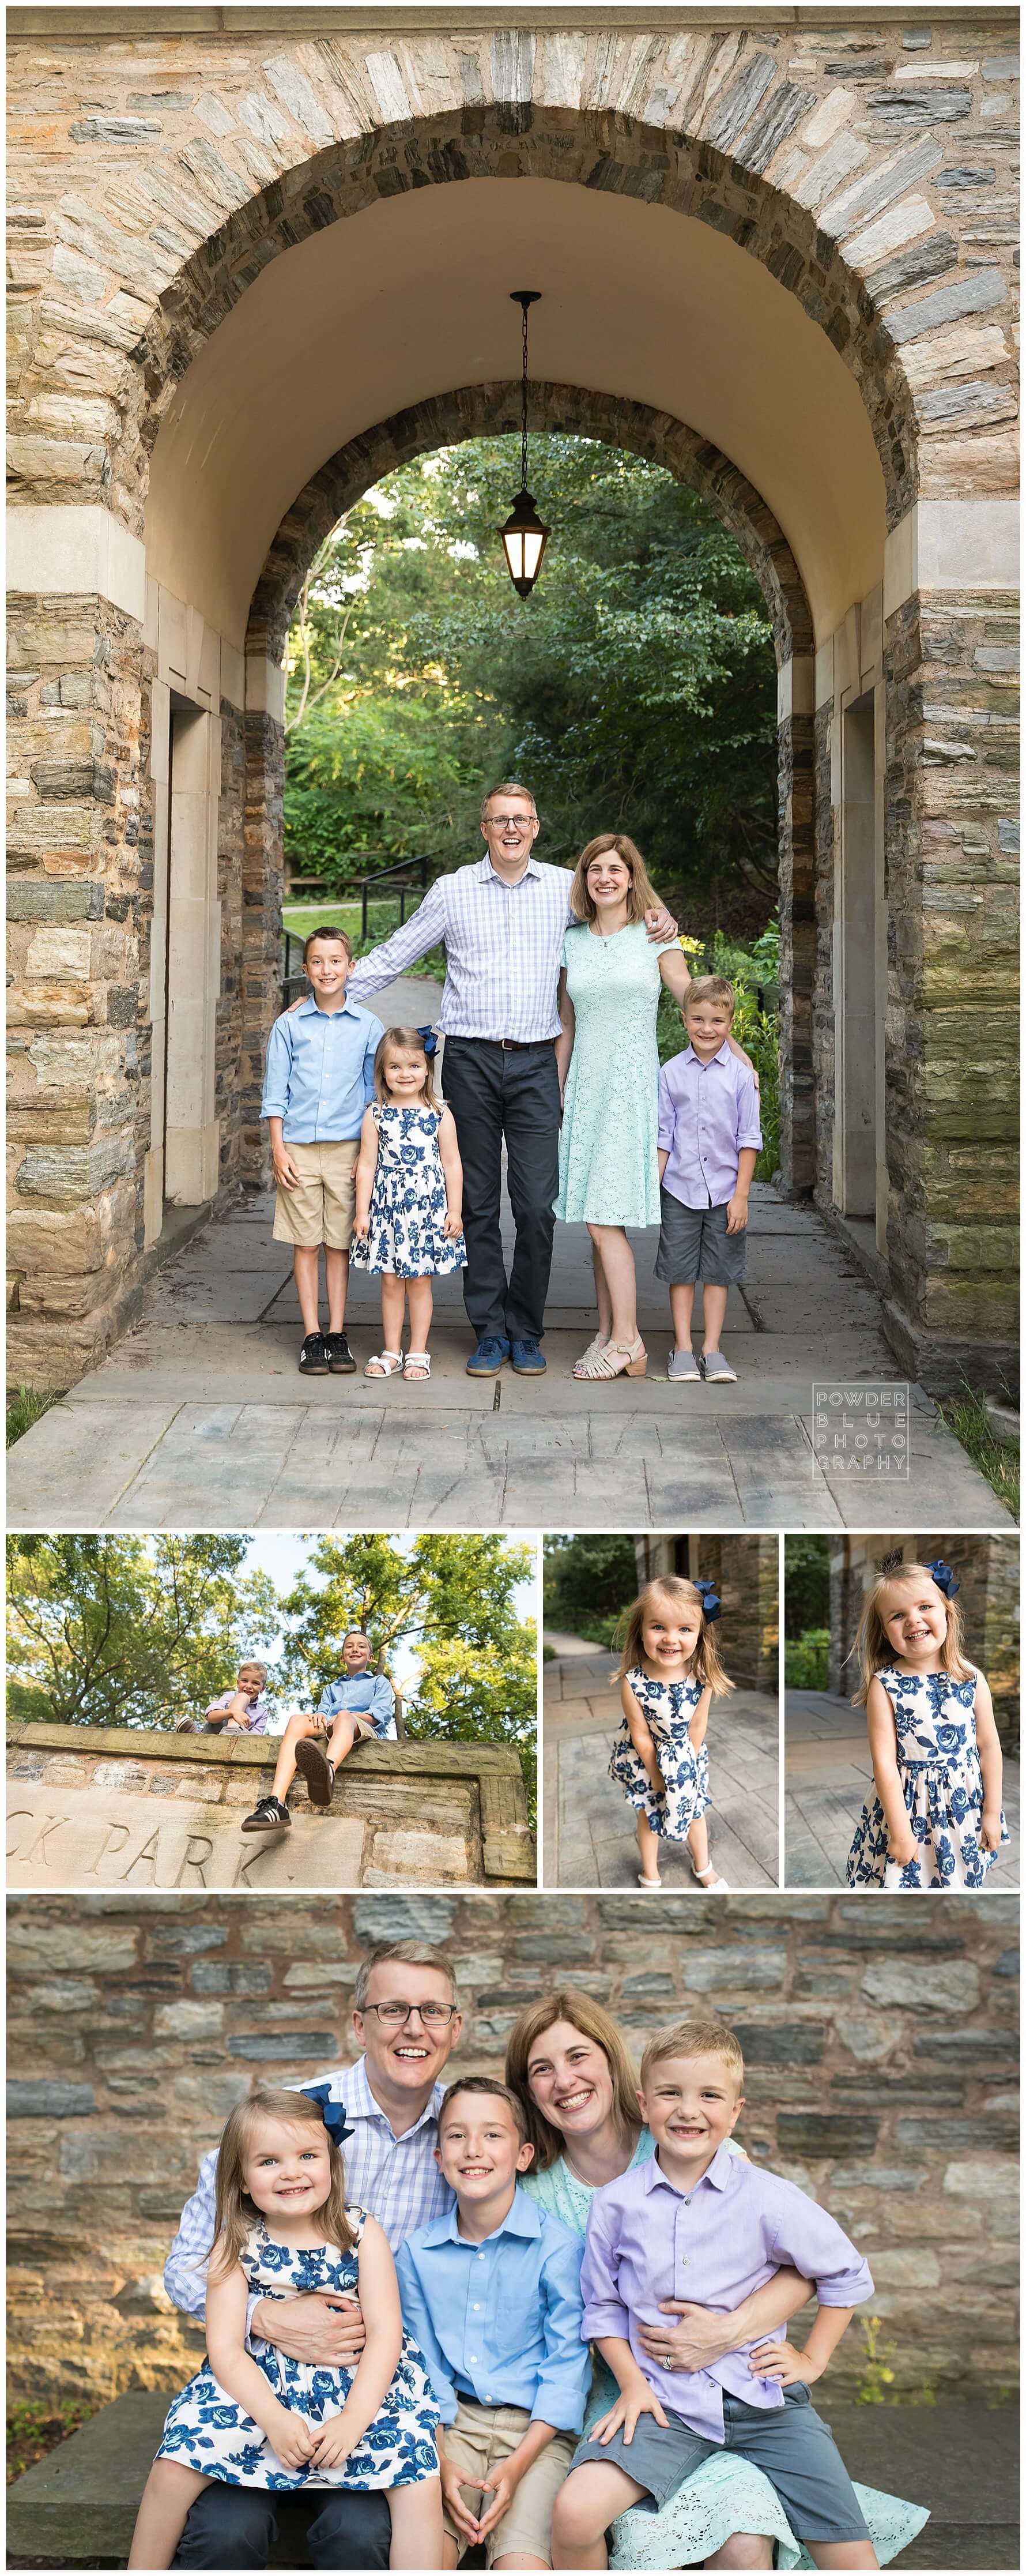 pittsburgh family portrait 70-200 canon lens at f4. on location family at Frick Park